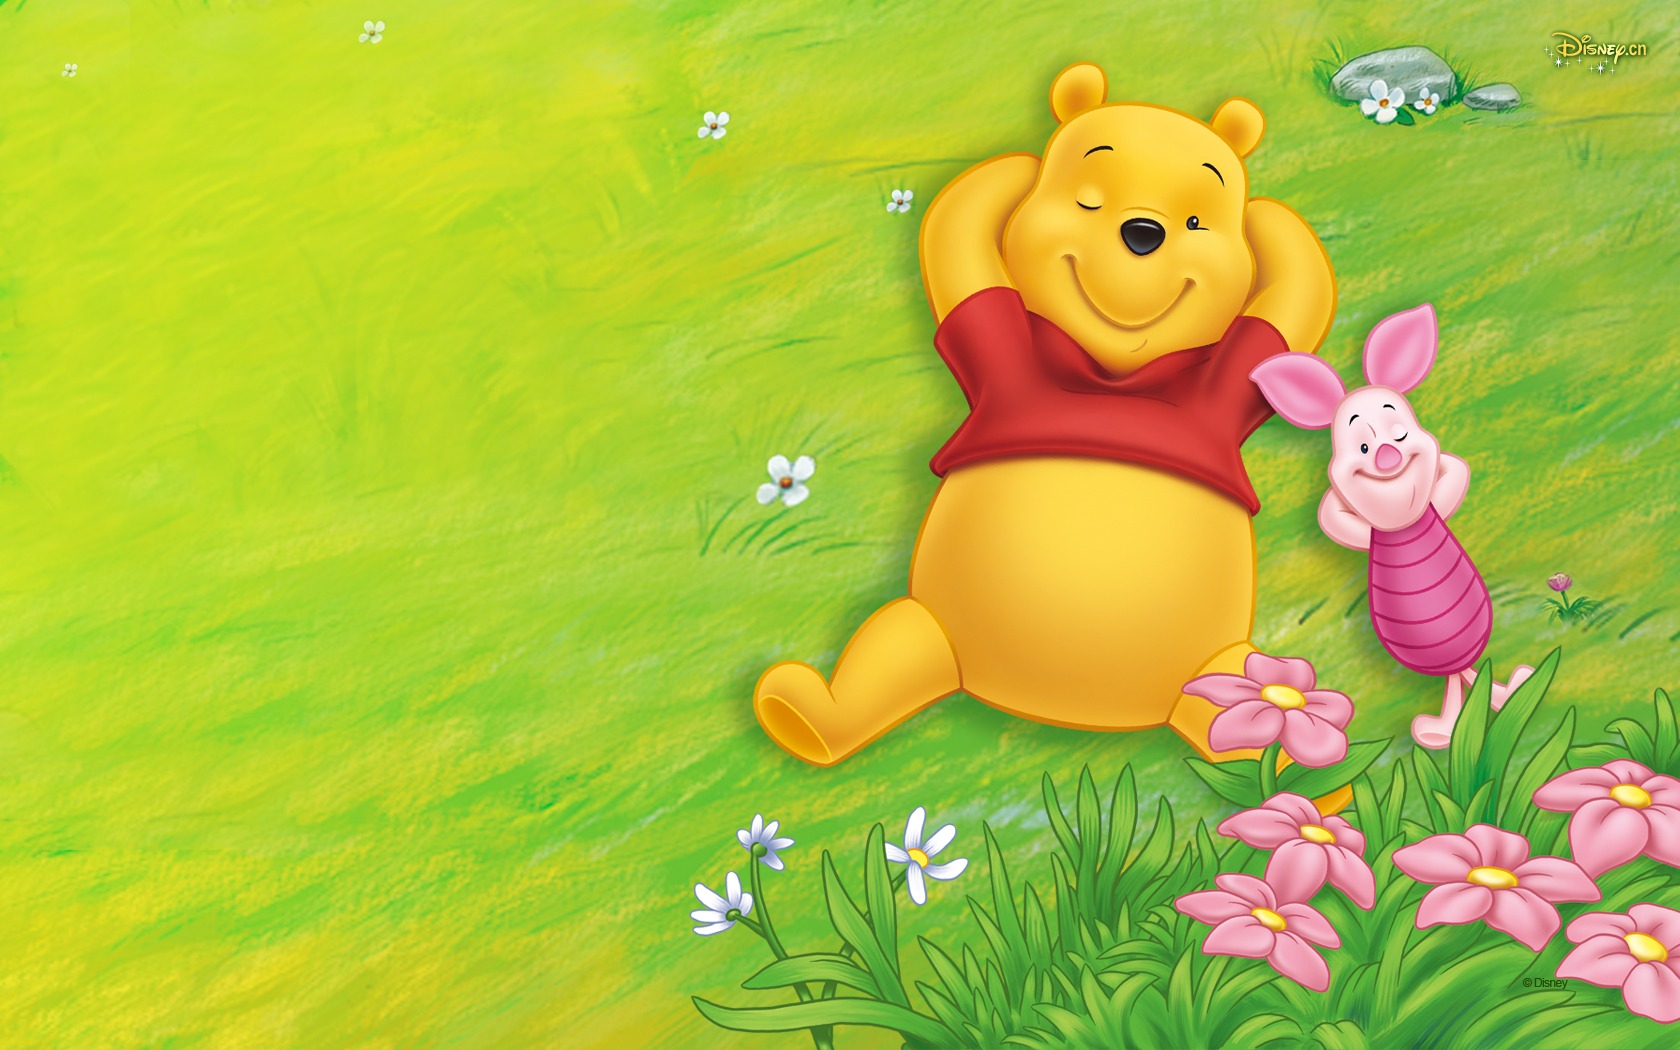 Winnie the pooh 6 Wallpaper, free winnie the pooh images, pictures download